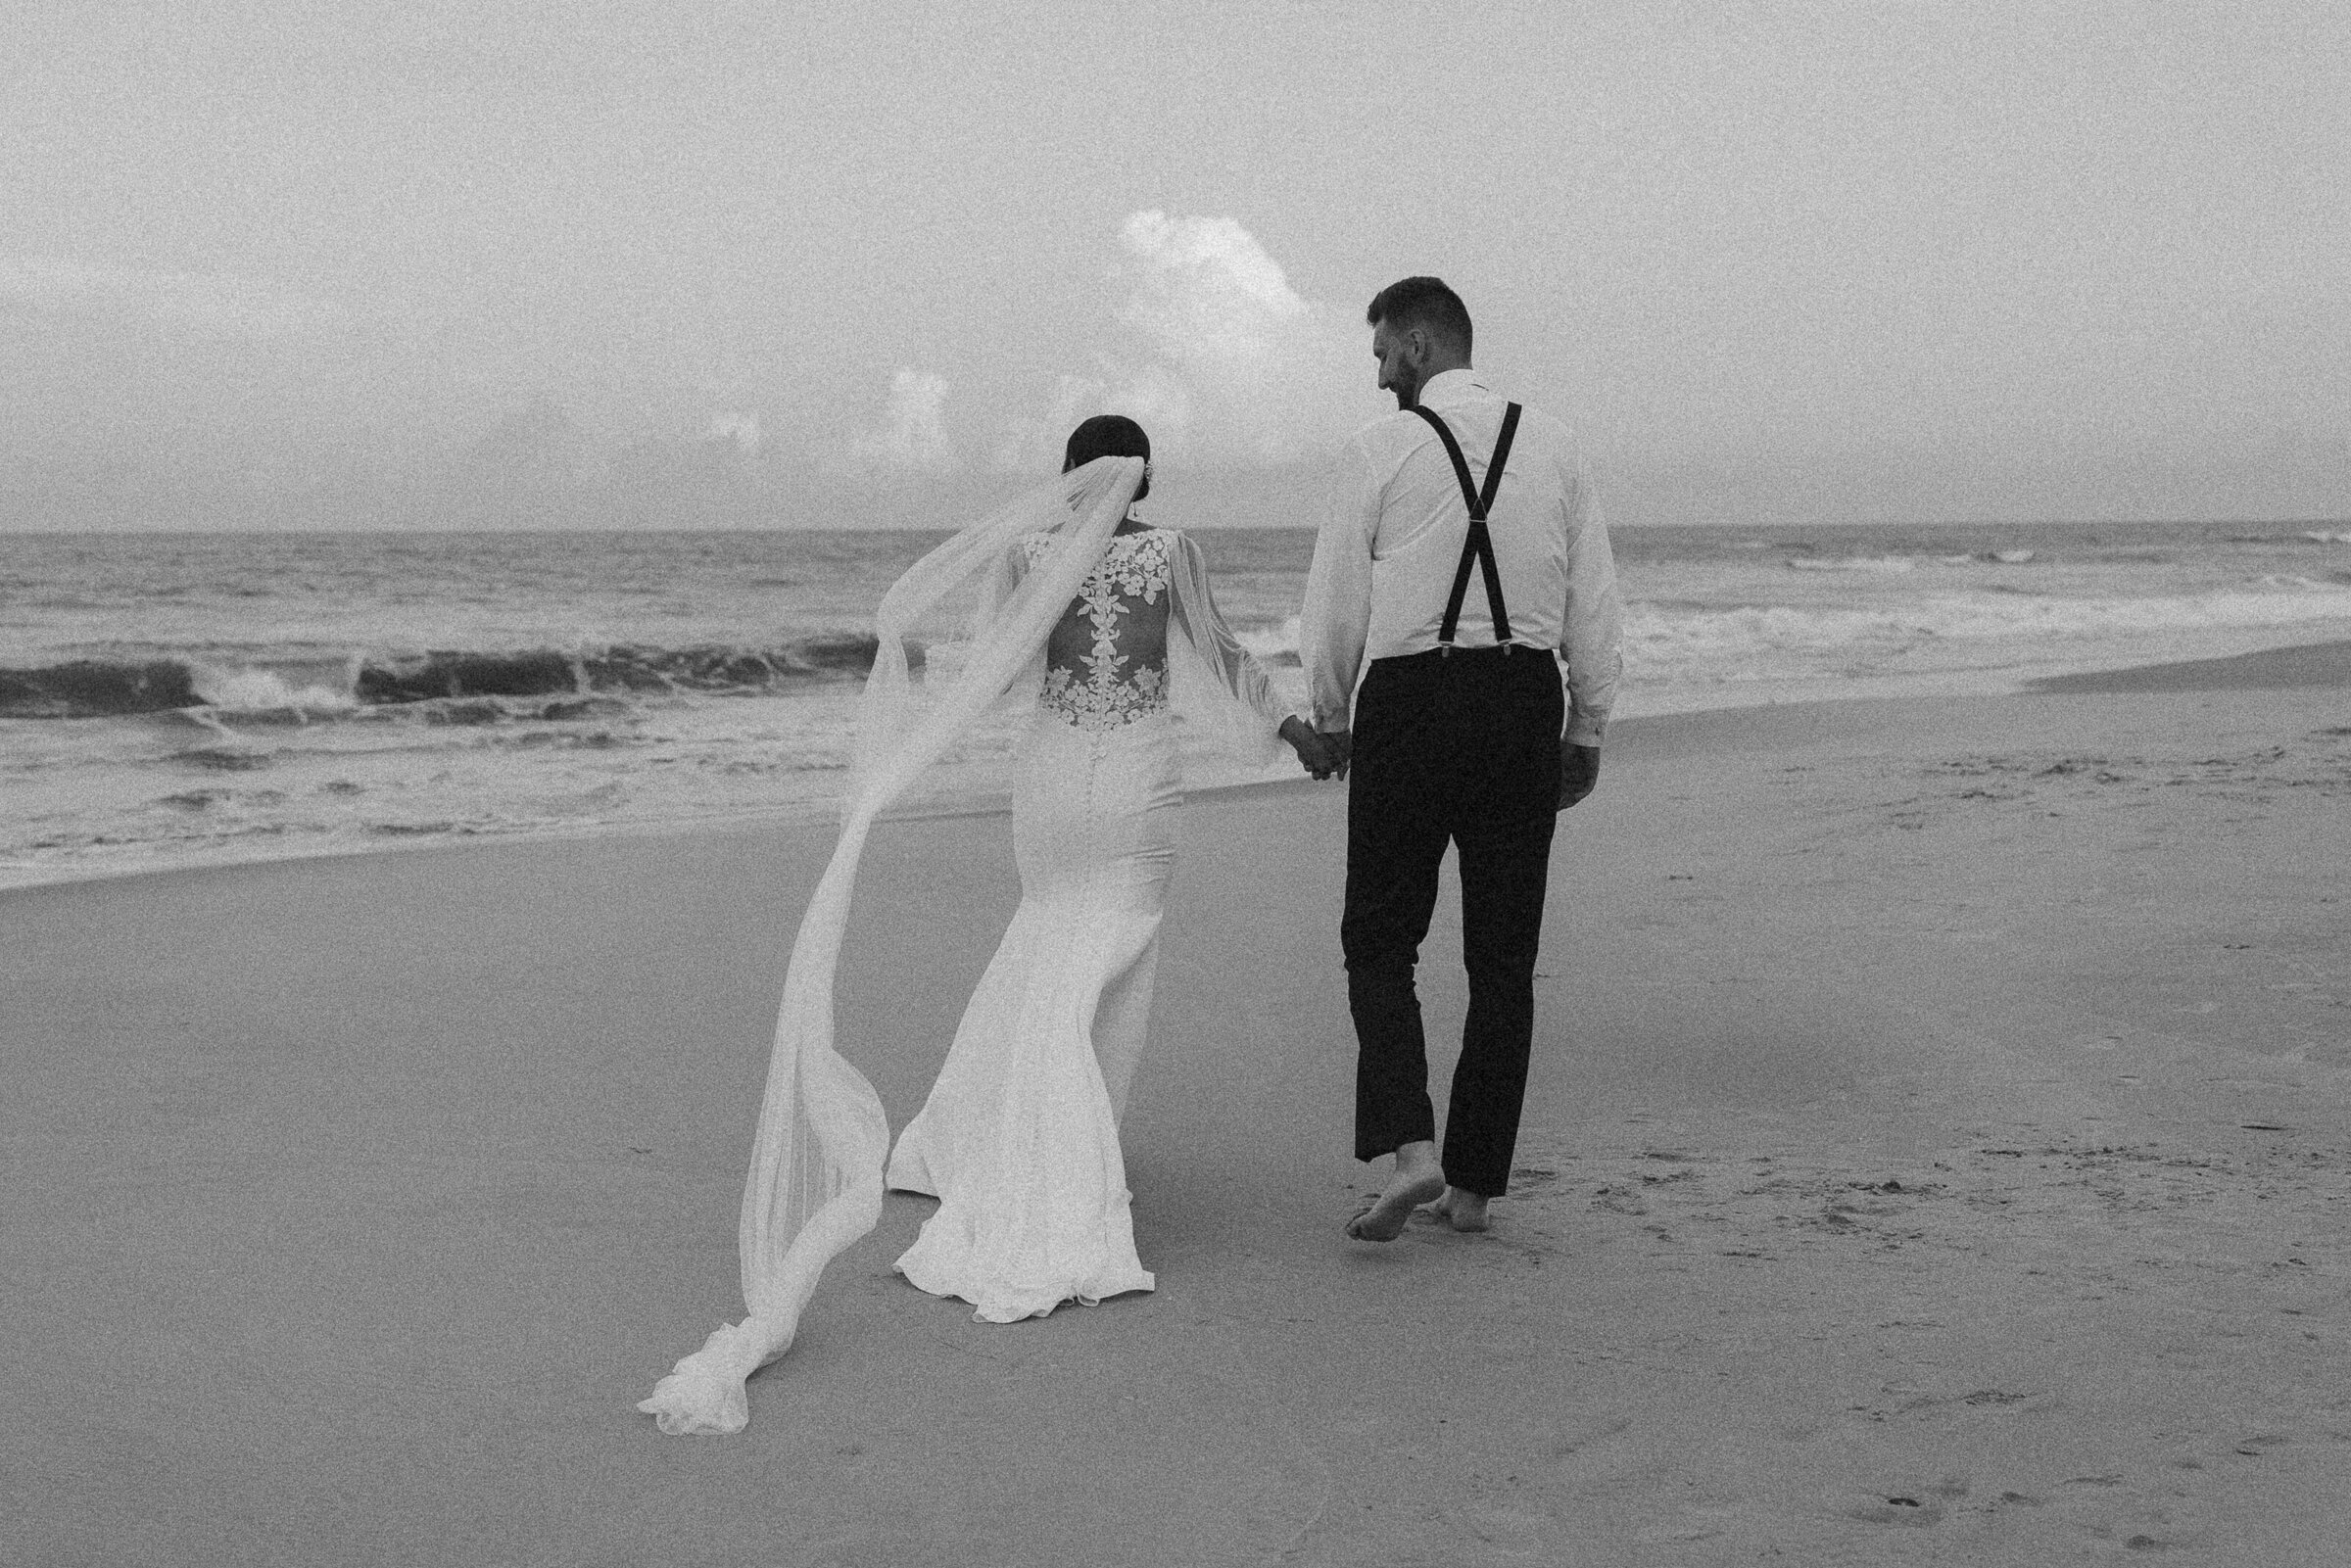 Couple strolling on beach in black and white